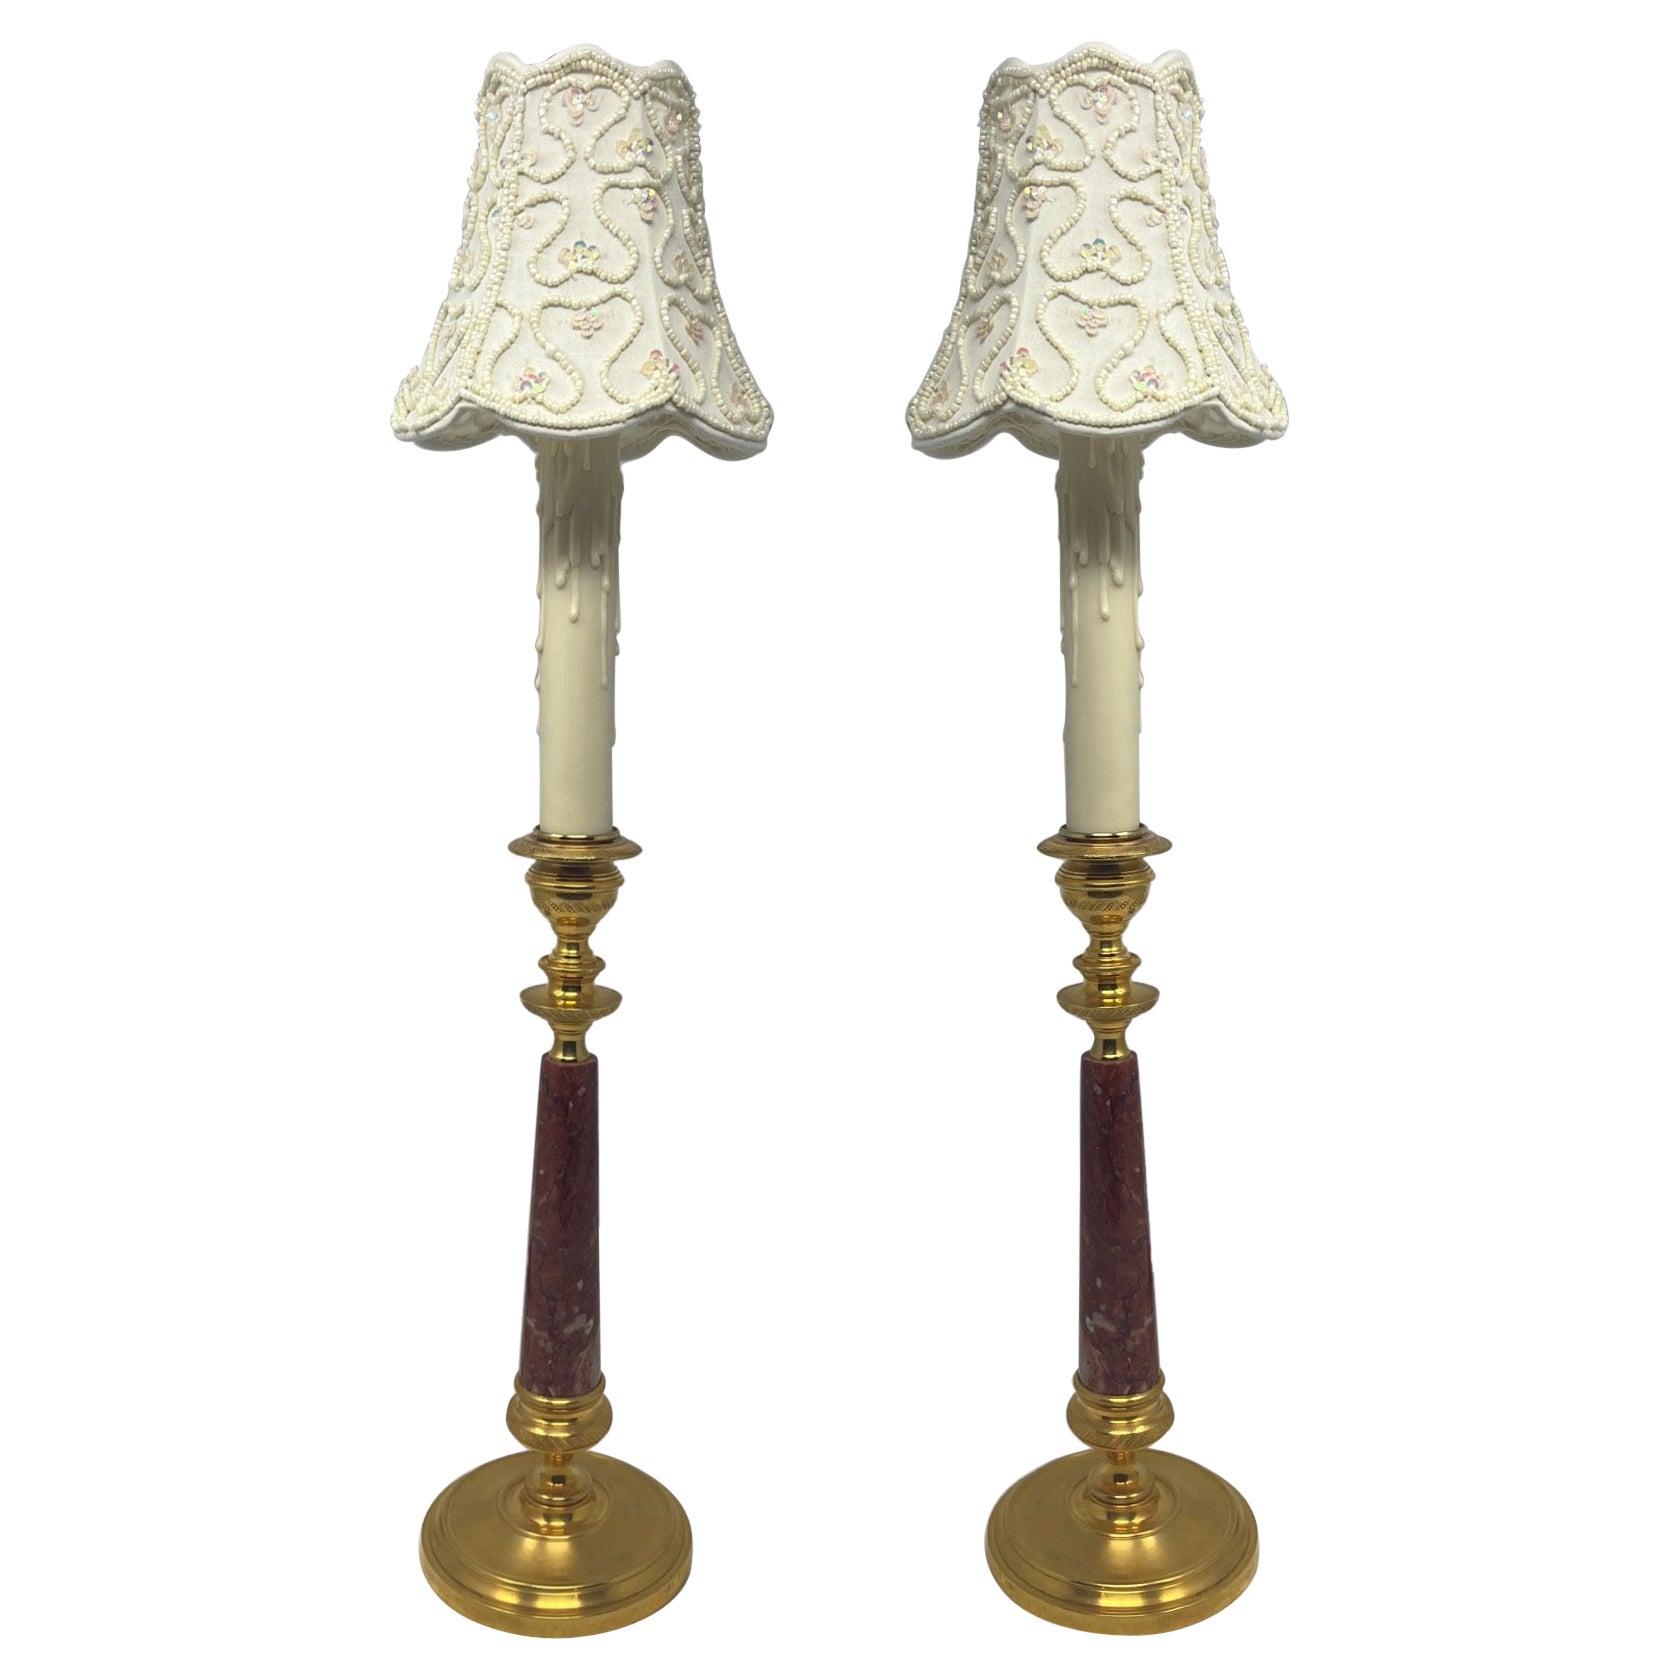 Pair Antique French Rouge Marble & Gold Bronze Candle Lamps, Circa 1890-1910.